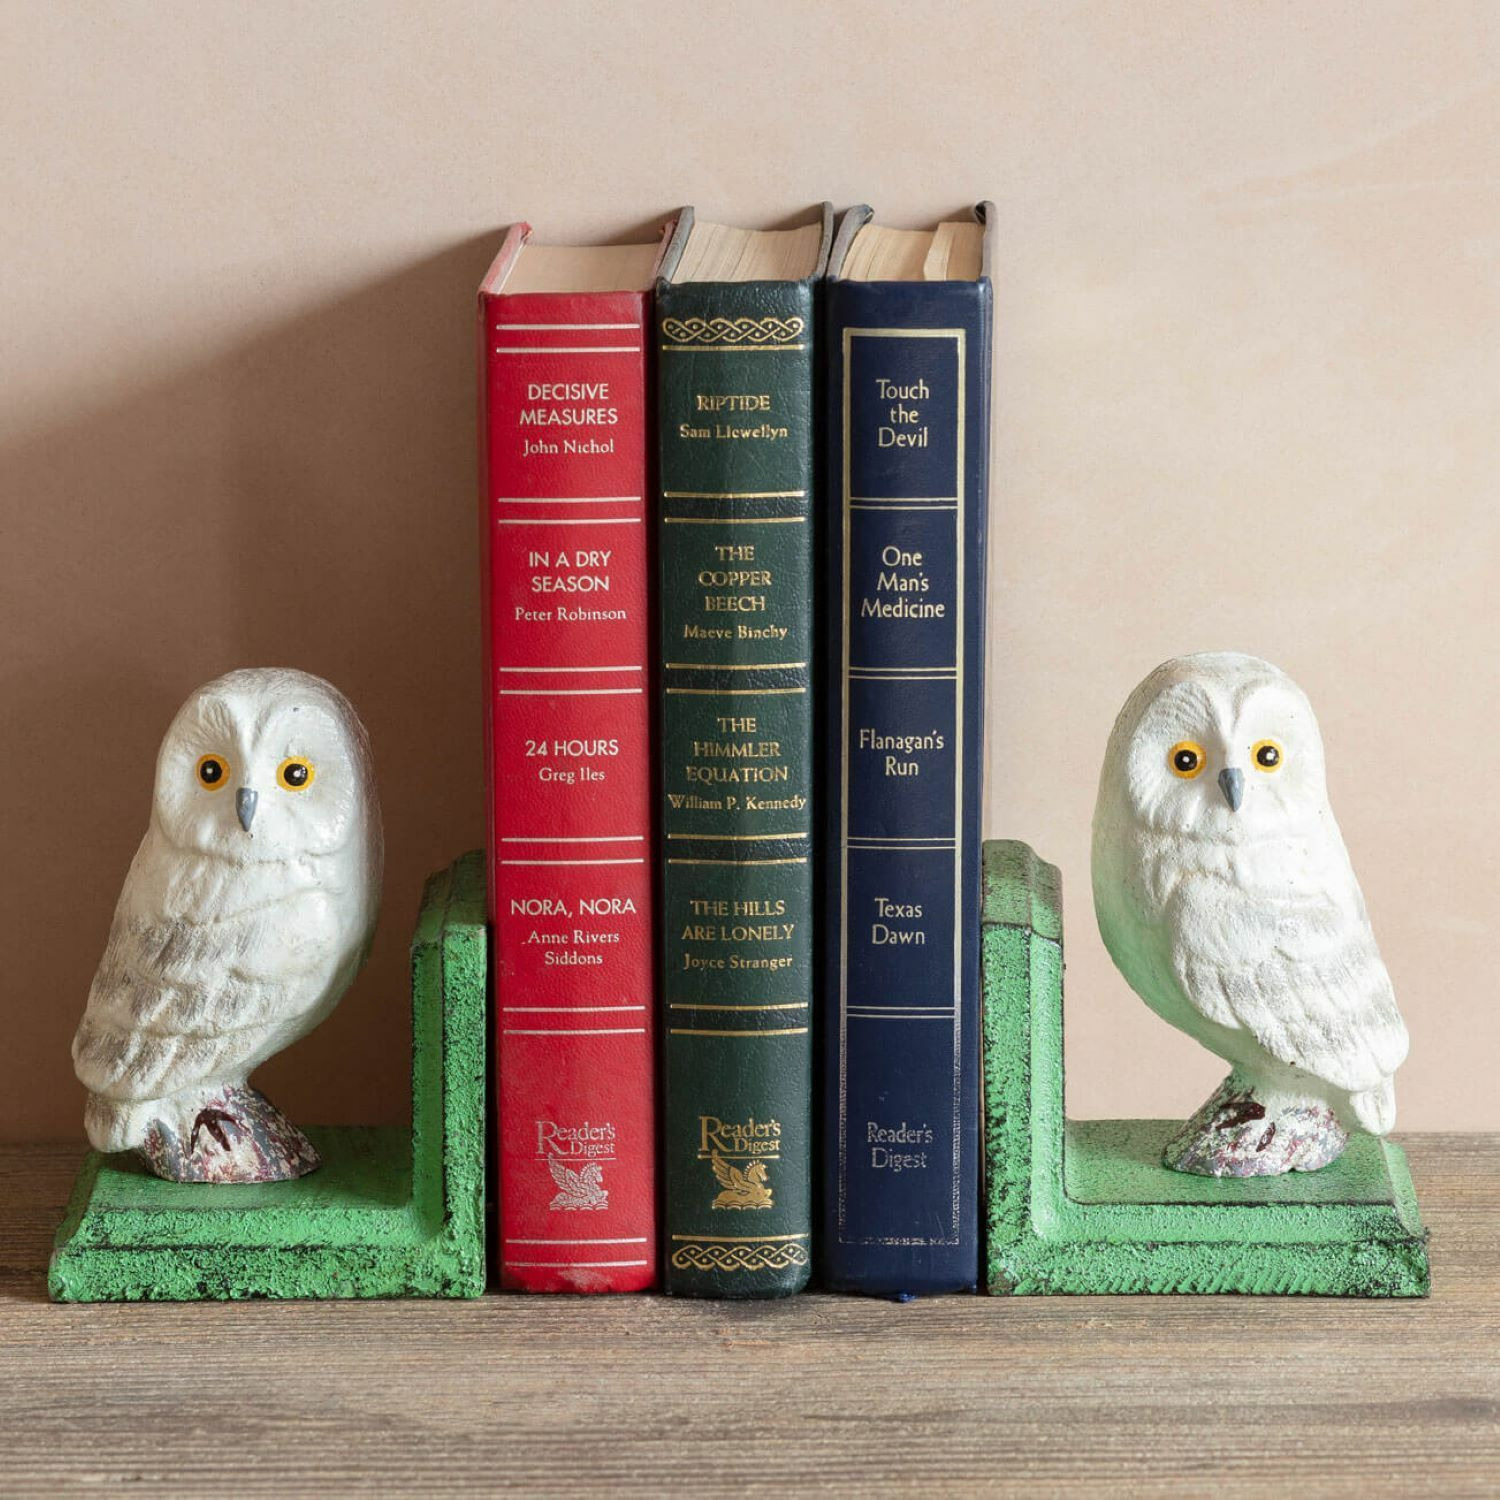 Graham and Green Antiqued Owl Bookends - image 1